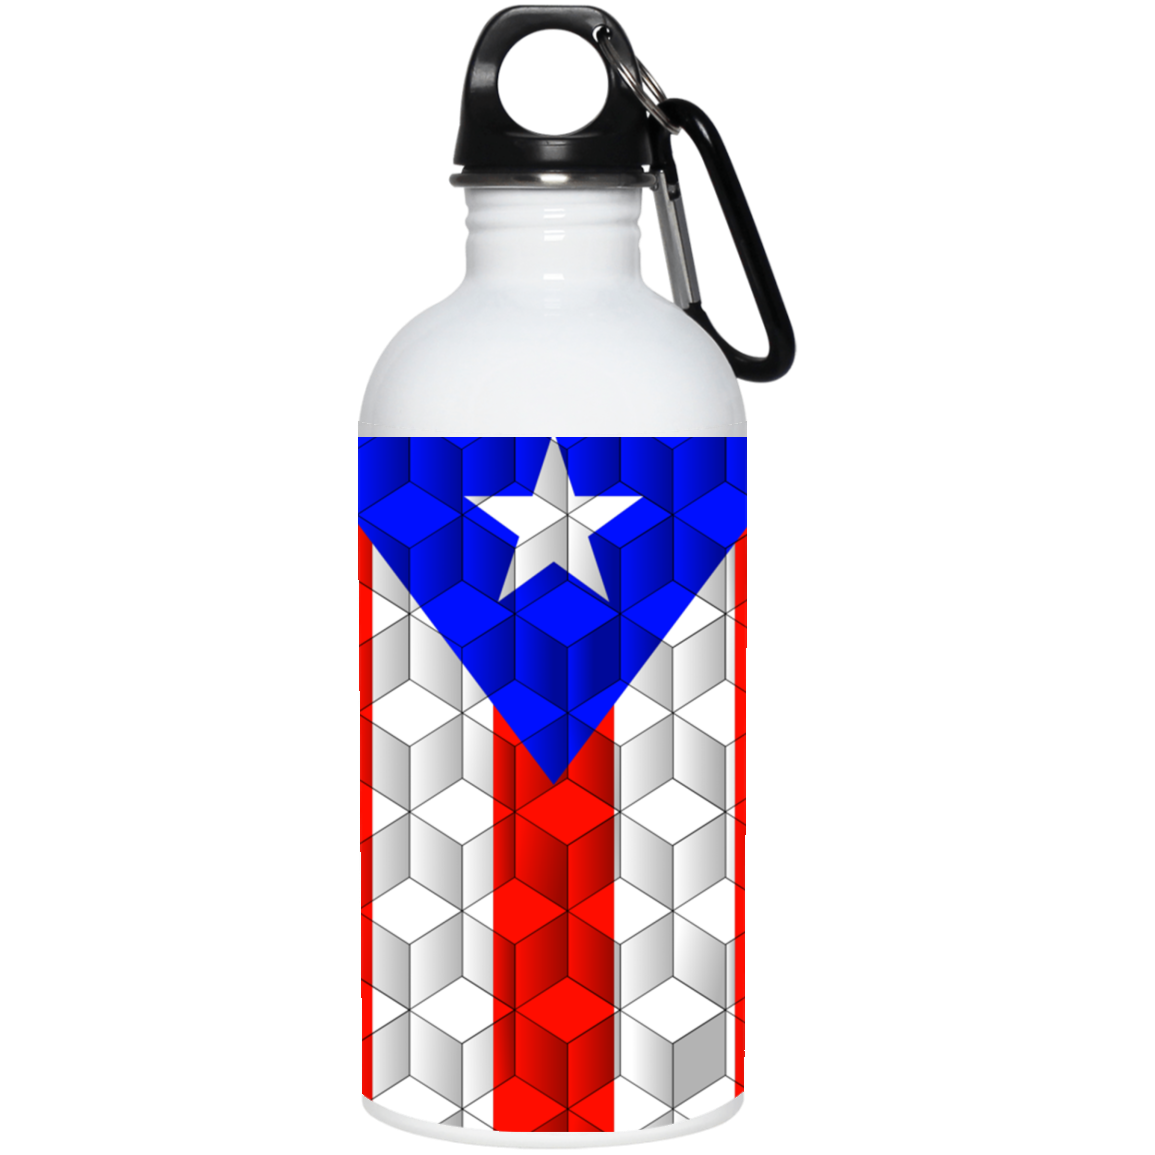 Abstract Flag 20 oz. Stainless Steel Water Bottle - Puerto Rican Pride